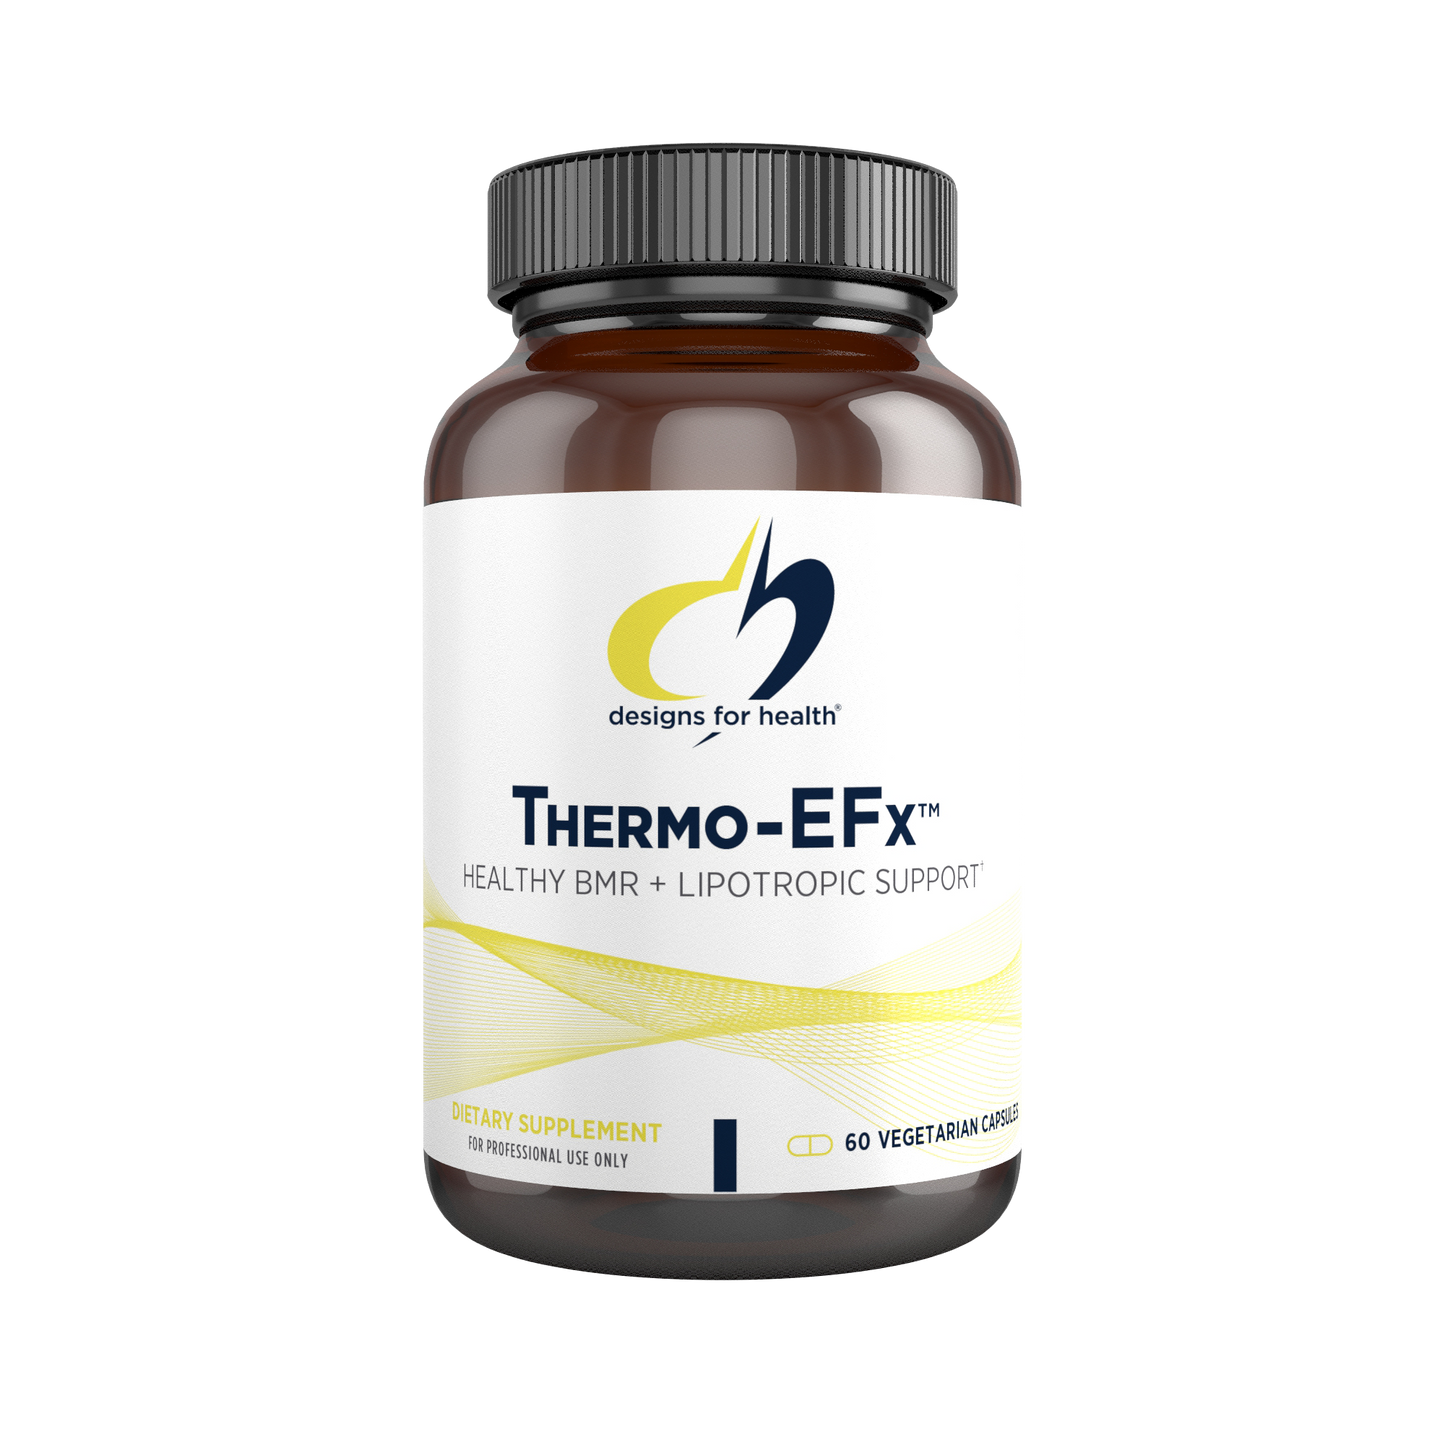 Thermo-EFx™ - Designs for Health (DFH)